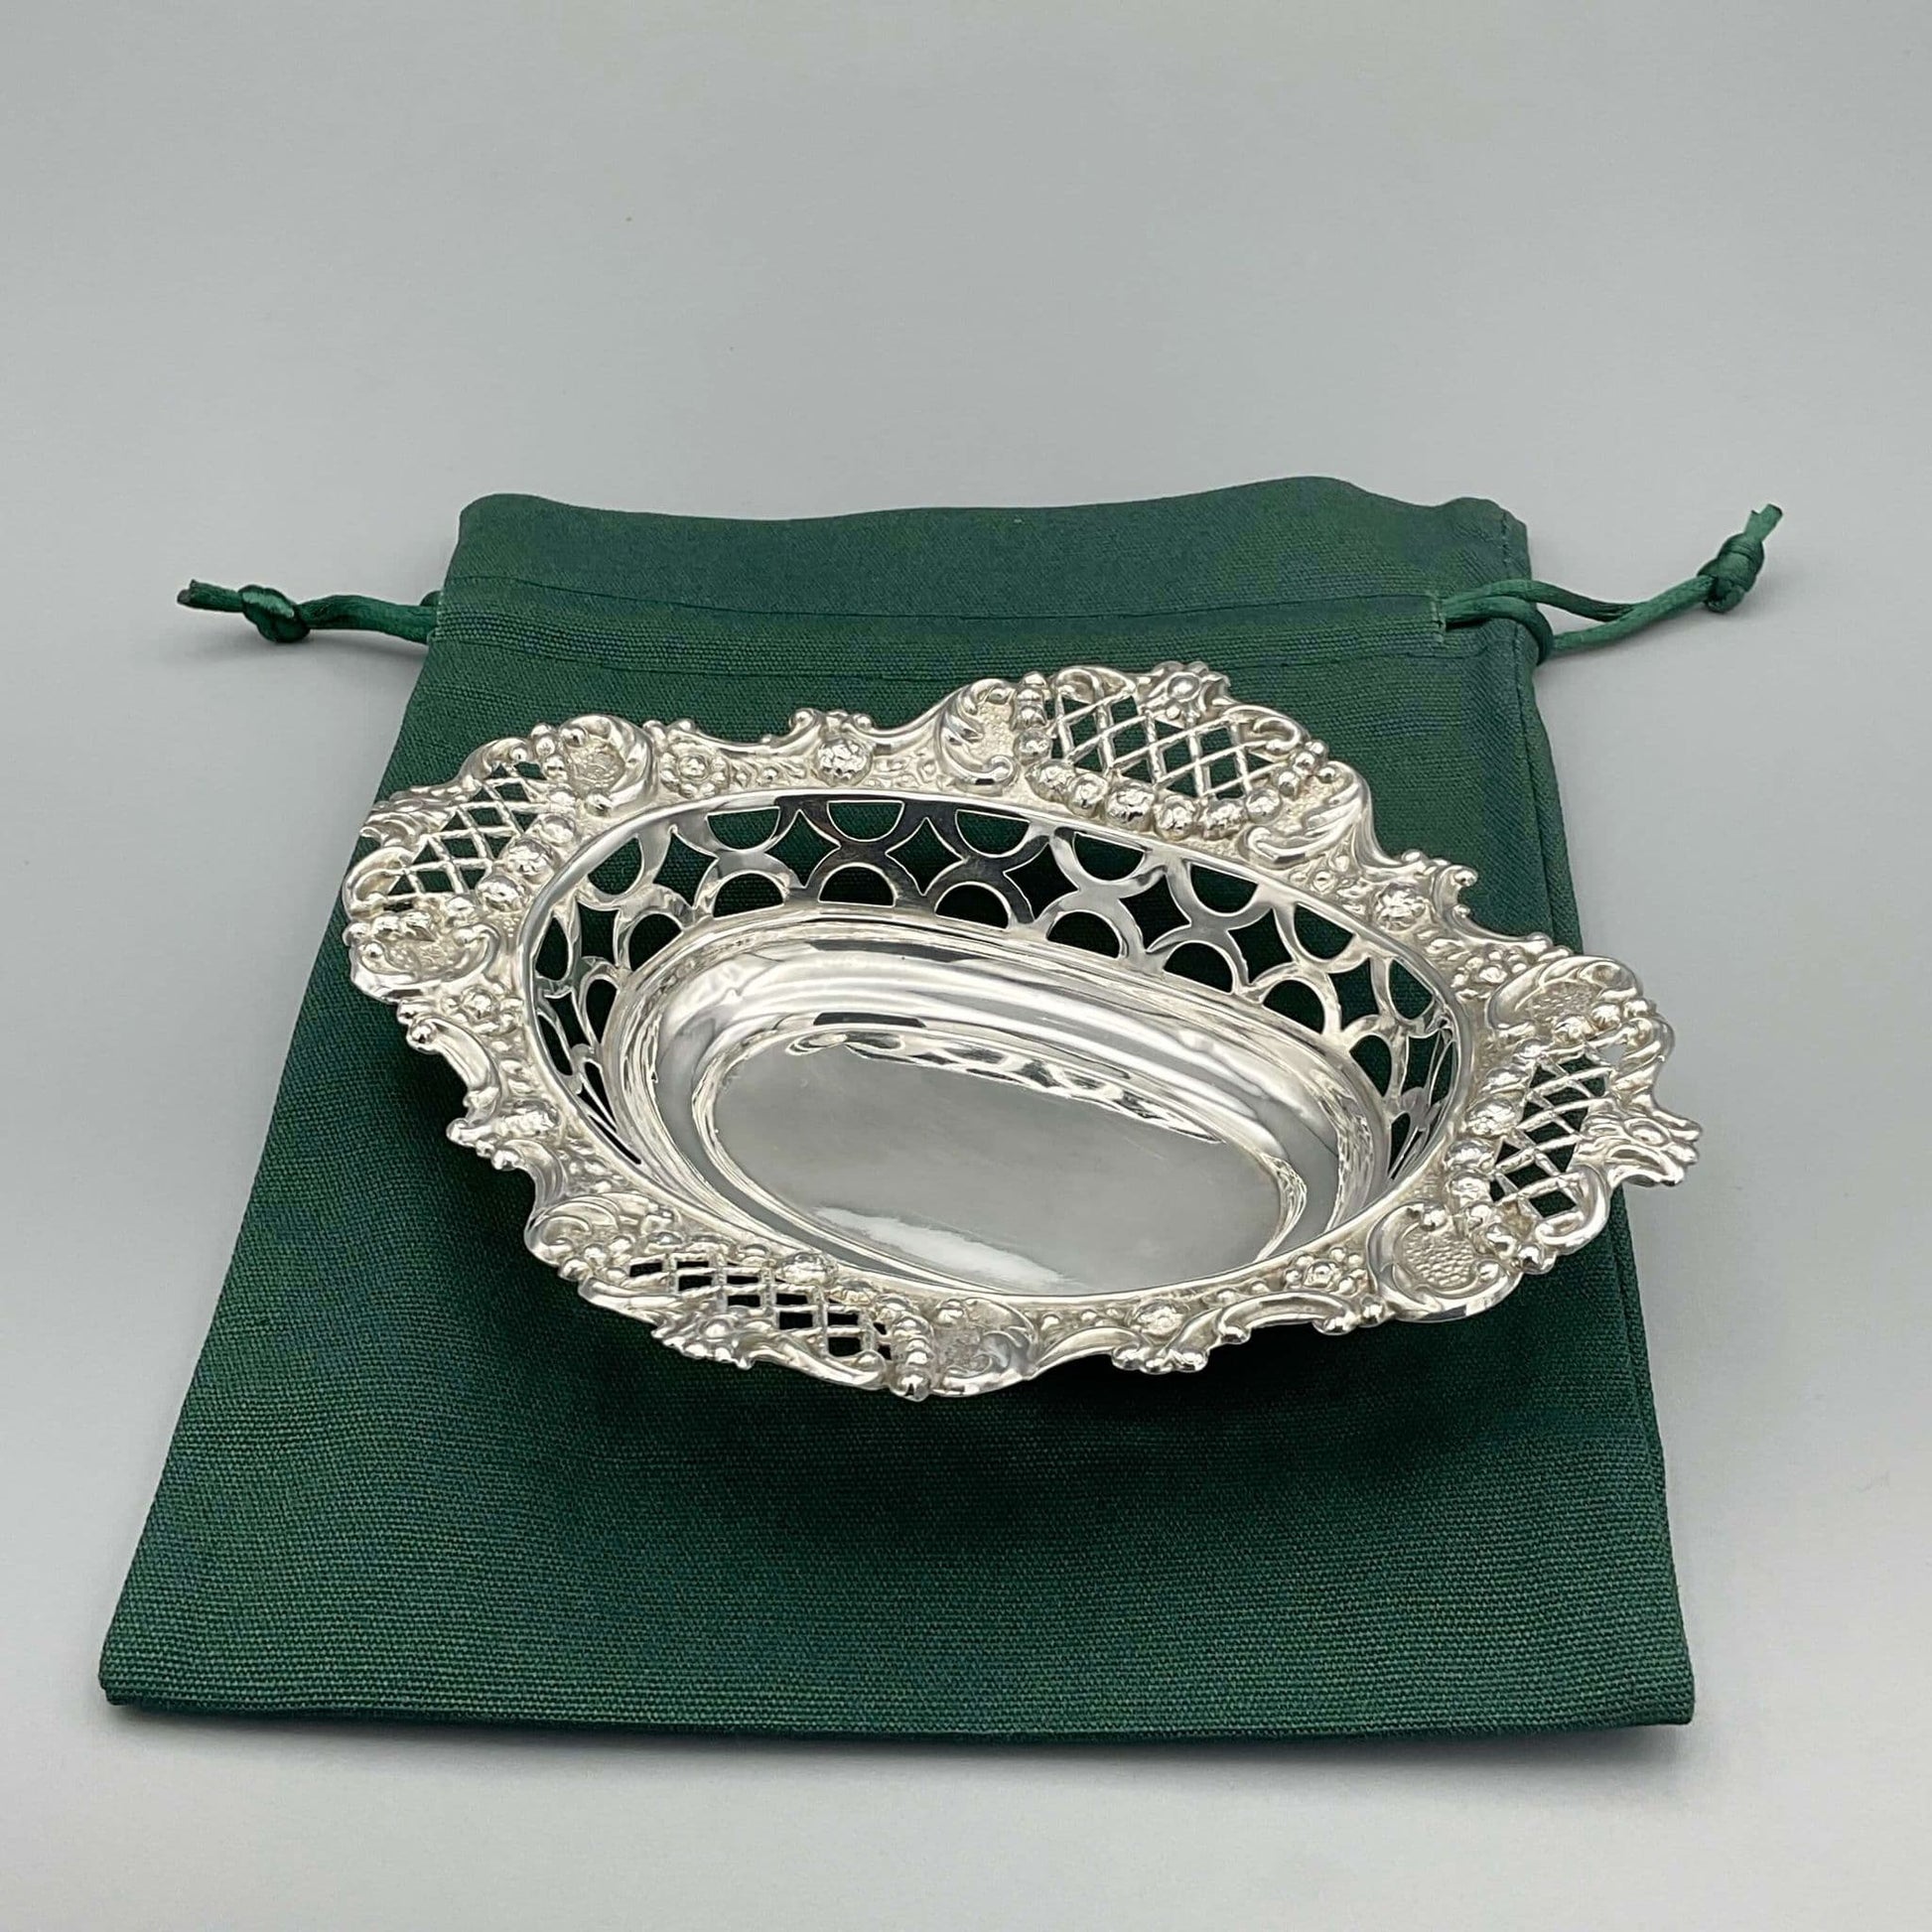 Ornate silver pierced bowl on grey background Sitting on green cotton gift bag